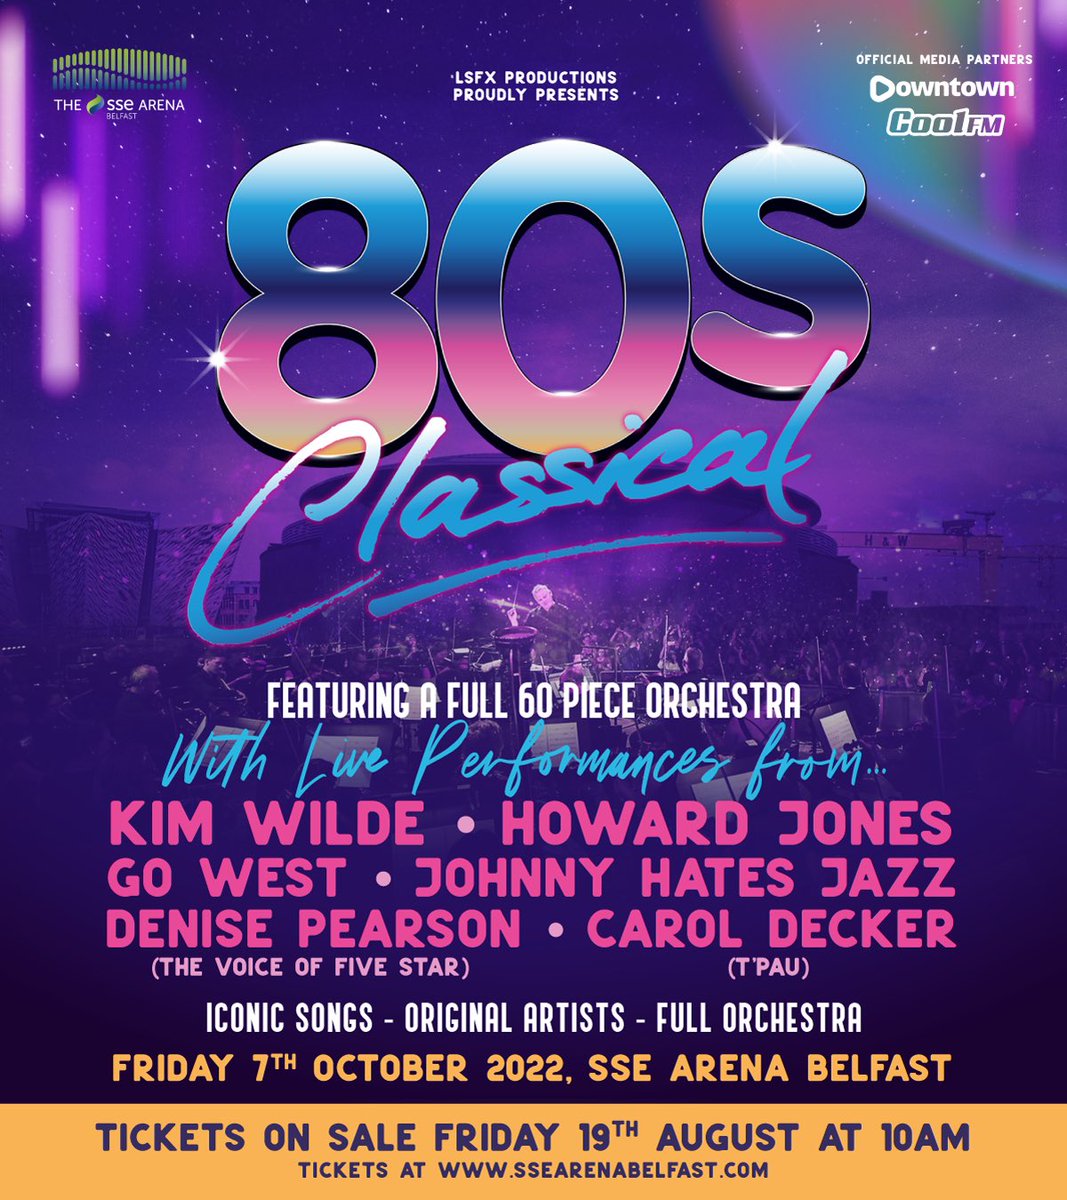 Tickets are now on sale for the epic @80sClassical event at the SSE Arena, Belfast on Friday 7th October 2022! Great line-up, full 60 piece orchestra. Go to ssearenabelfast.com and secure yourself a place in history 🤩 @kimwilde @caroldecker @5starofficial @howardjones